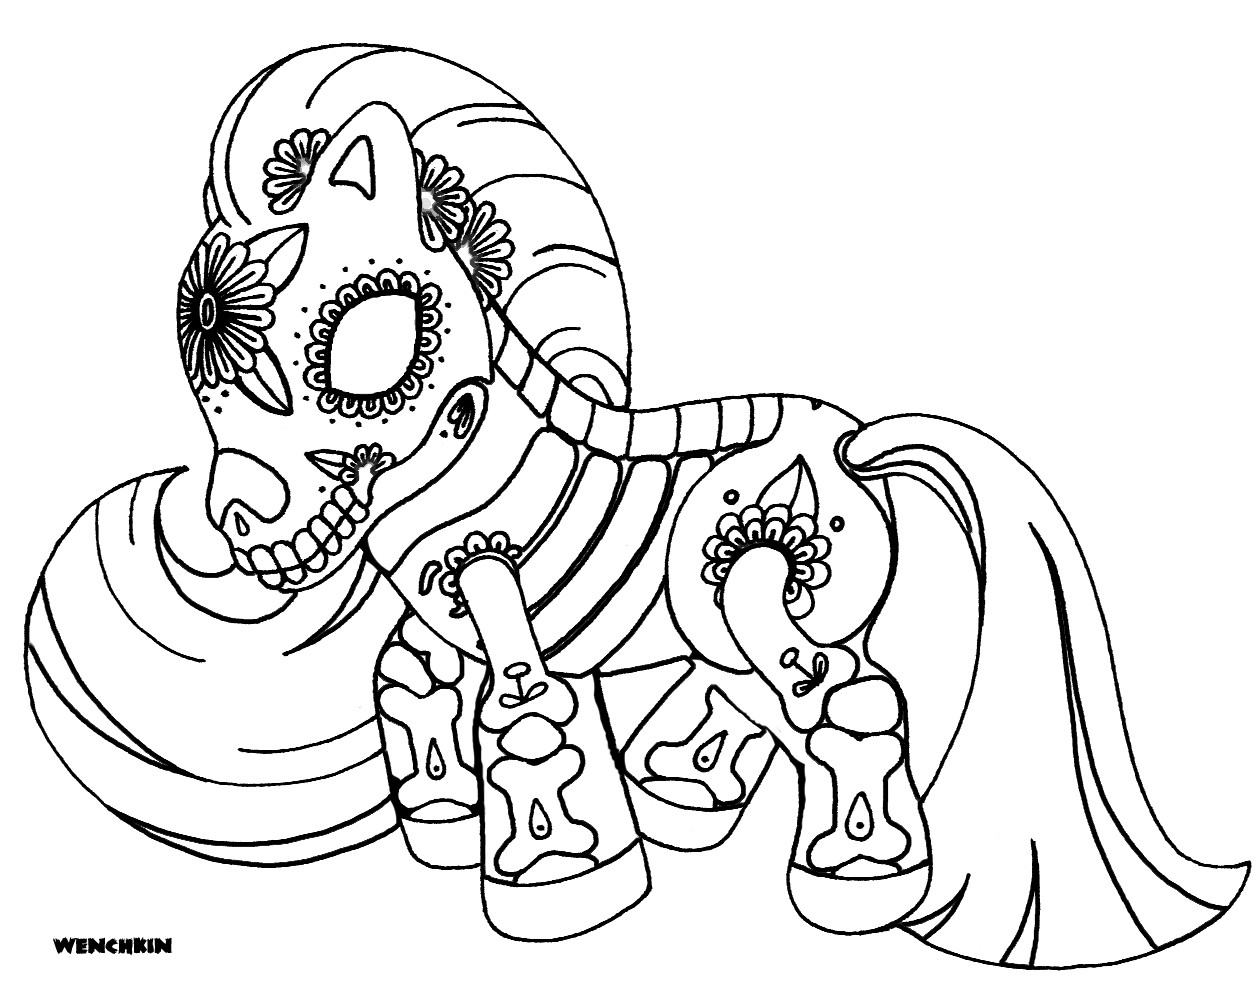 Girly Coloring Pages For Adults
 Yucca Flats N M Wenchkin s coloring pages skele pony